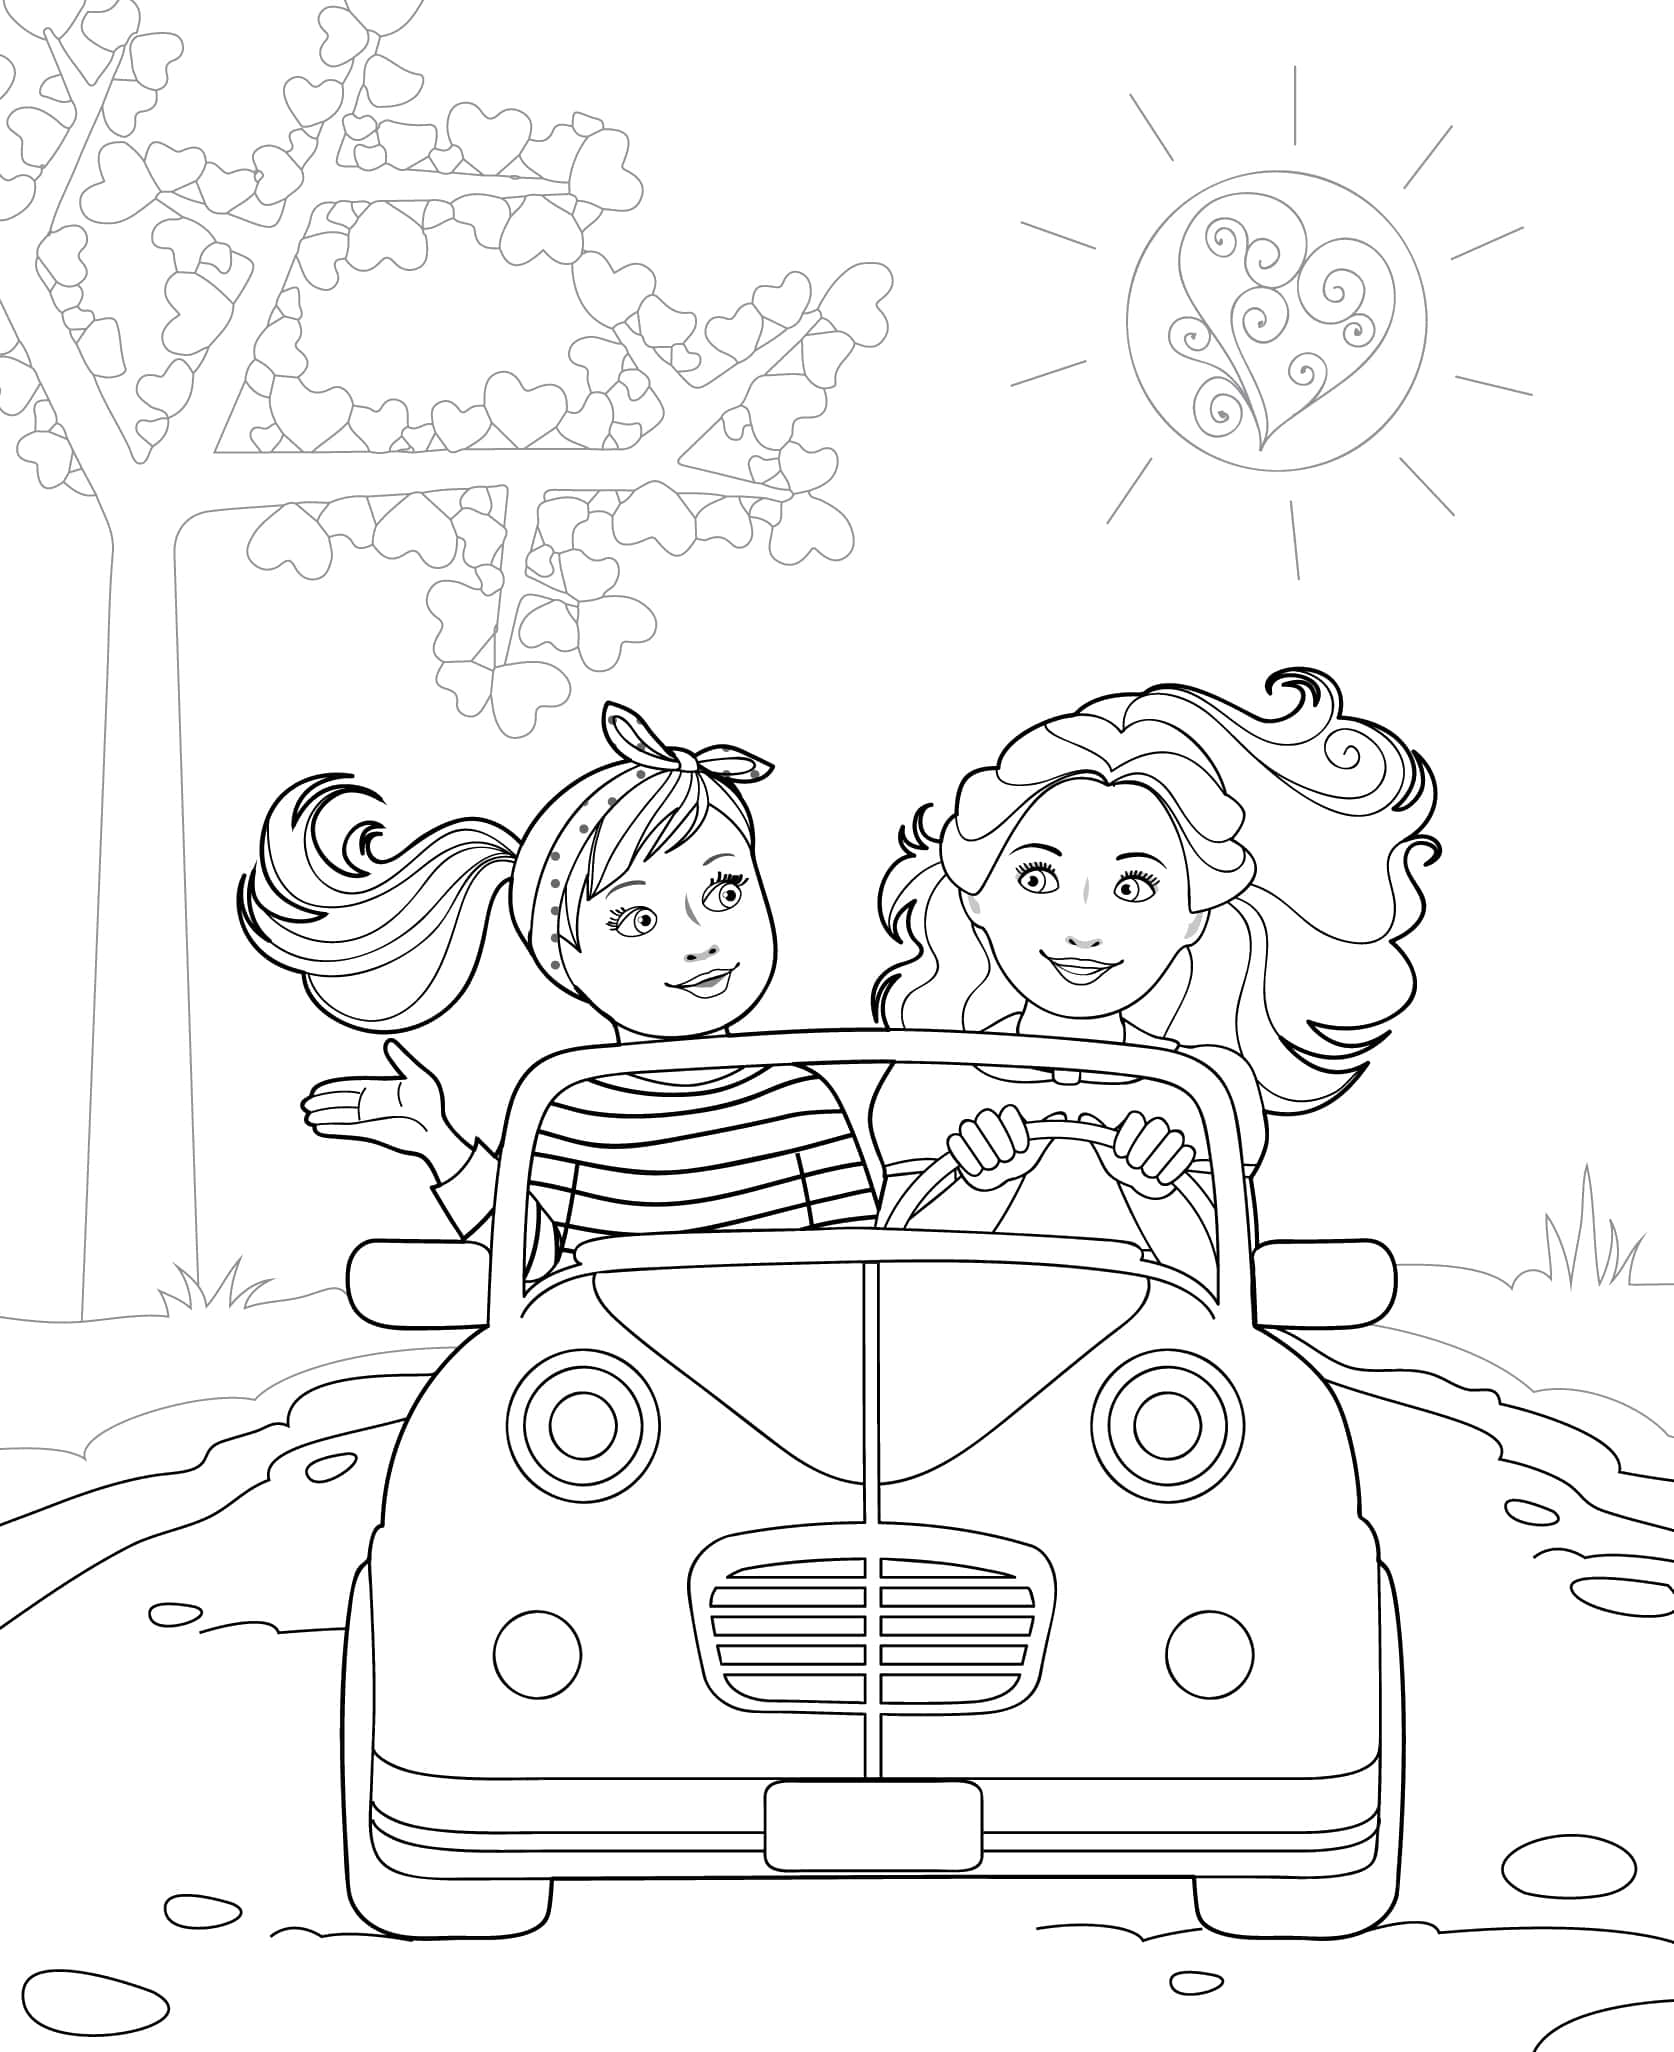 Doll Coloring Page For Girls - Coloring Home